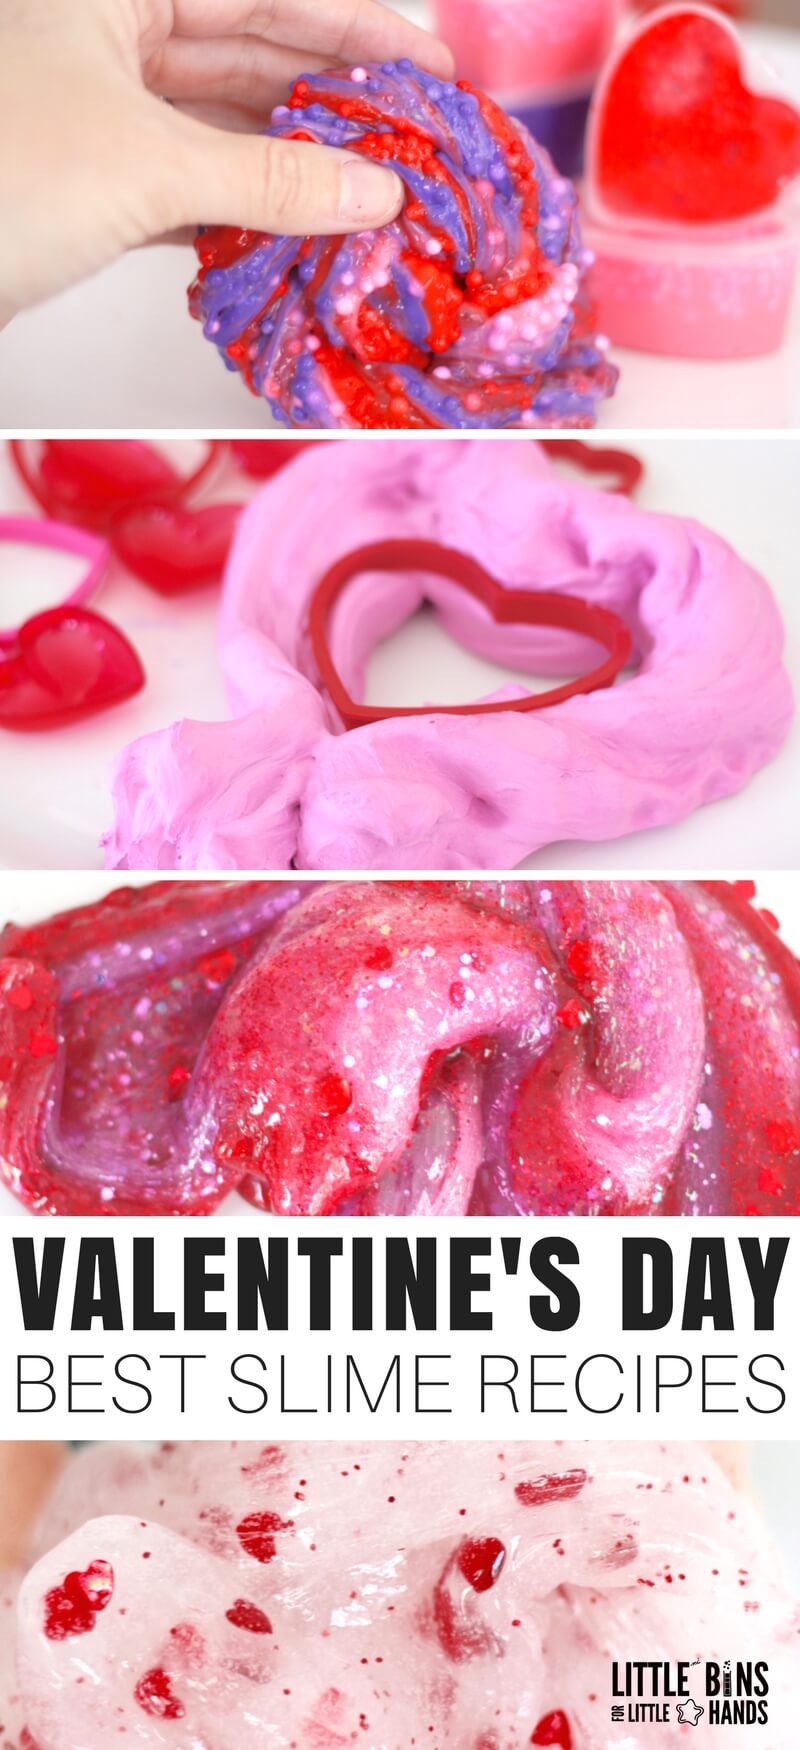 Our collection of amazing Valentines Day slime recipes has you covered this season. Valentine's Day is right around the corner, and there's no better way to say it then with slime. Making homemade slime is quick and easy with our basic slime recipes and tips. Happy Valenslimes Day! You will also find handy ways to package slime for fun treats to give instead of candy this year including free printable cards!